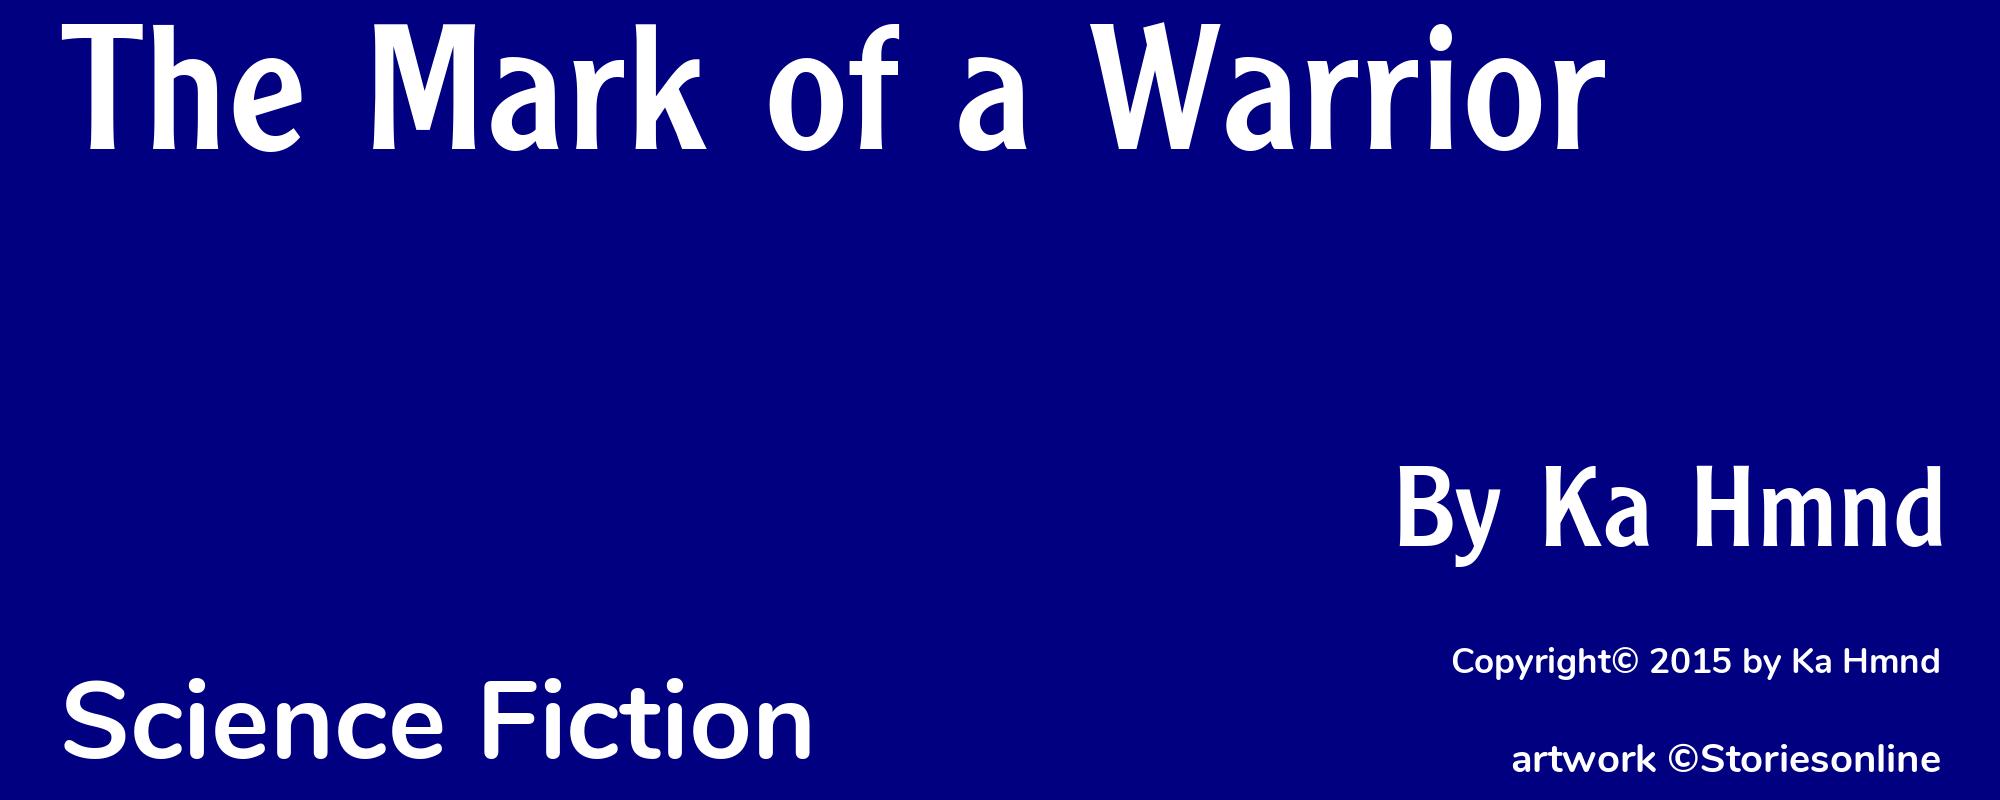 The Mark of a Warrior - Cover